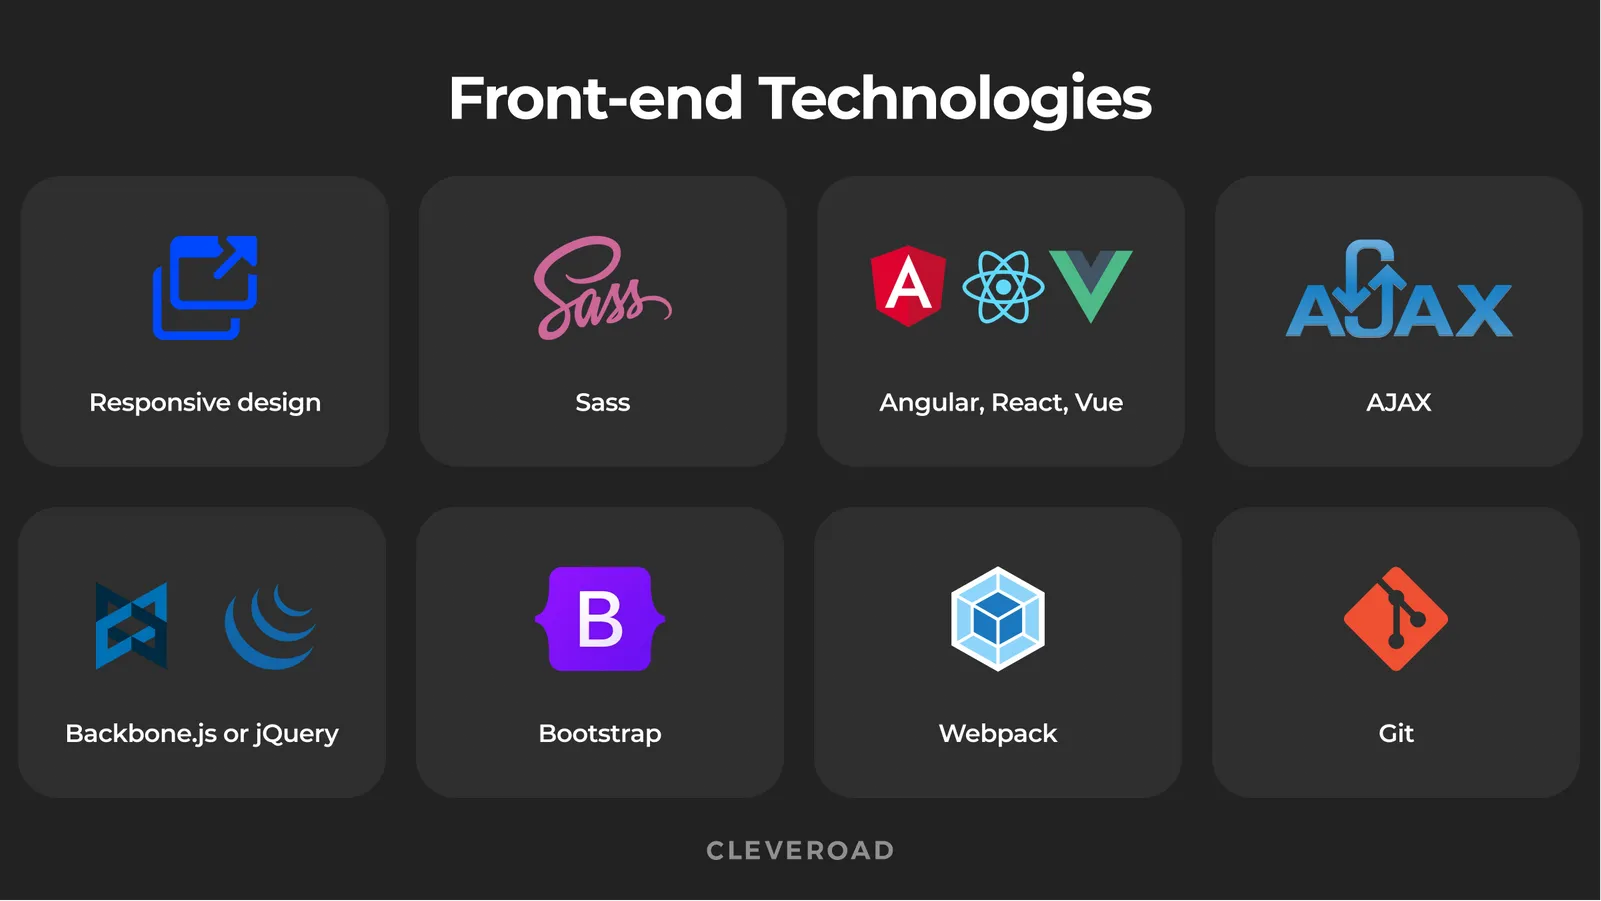 The front-end developer tech stack